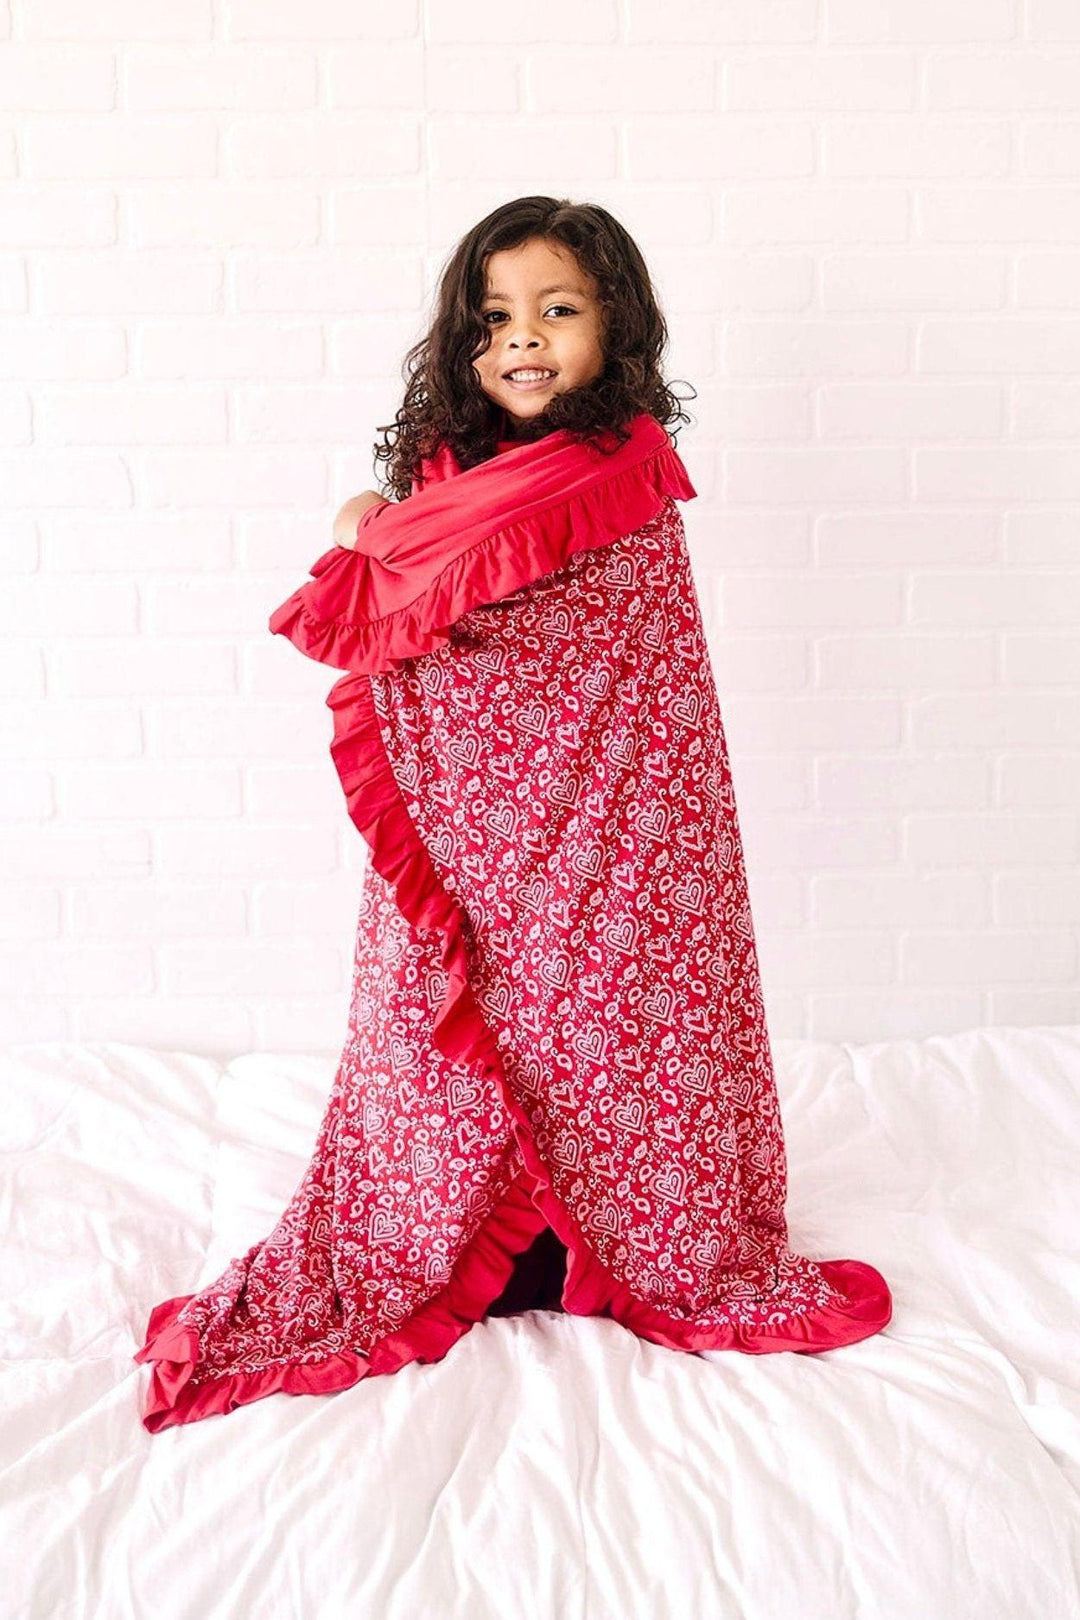 Red Paisley Hearts Starry Dreams Bamboo Ruffle Blanket - Valentine's Day - Sophia Rose Children's Boutique